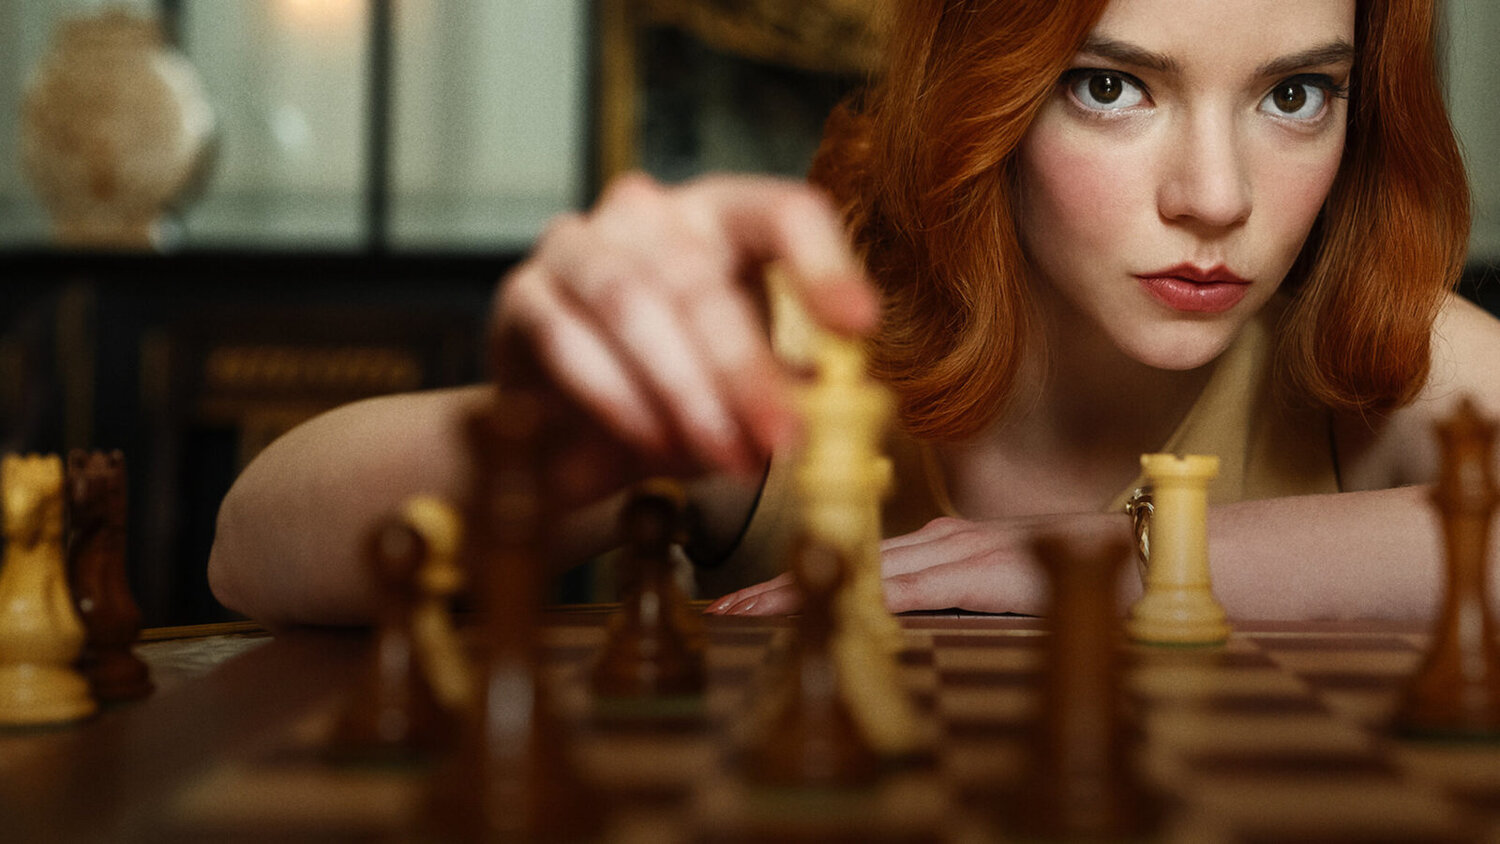 How The Queen's Gambit Made Chess Believable and Exciting